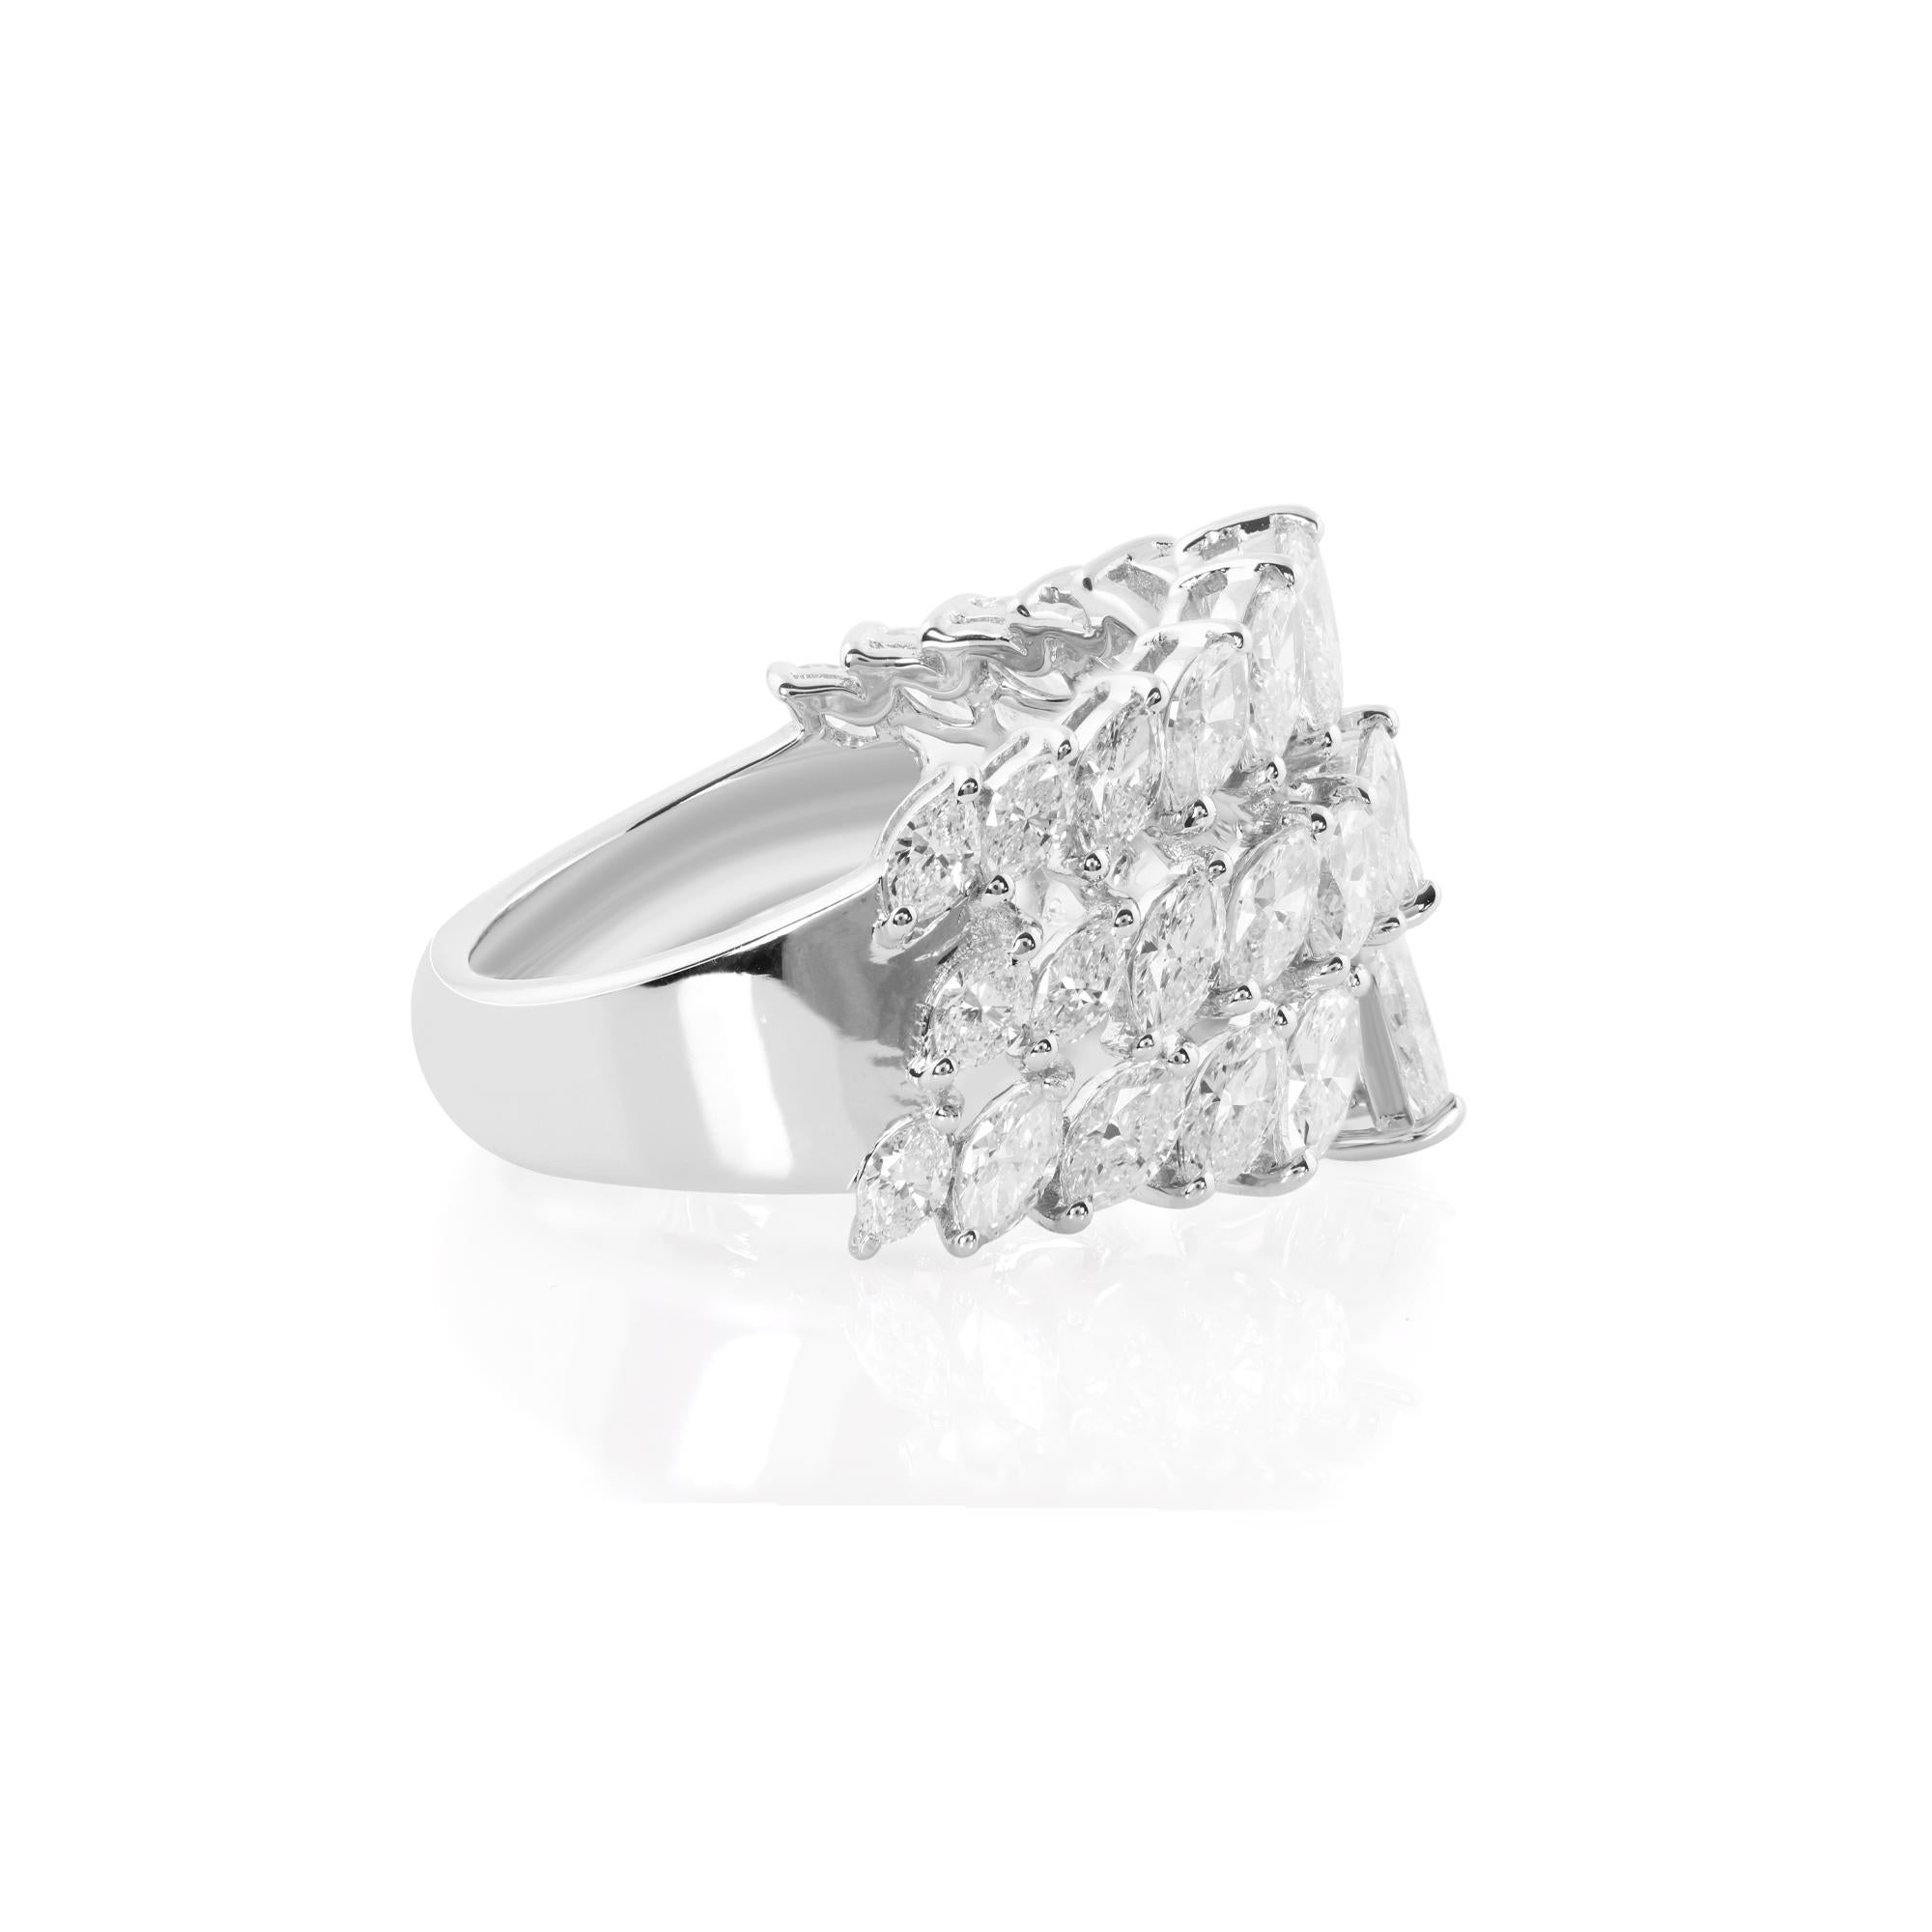 At the heart of this stunning cuff ring lies a magnificent 2.77 carat marquise-cut diamond, expertly chosen for its exceptional brilliance and captivating beauty. The marquise cut, with its elongated shape and gracefully tapered ends, exudes a sense